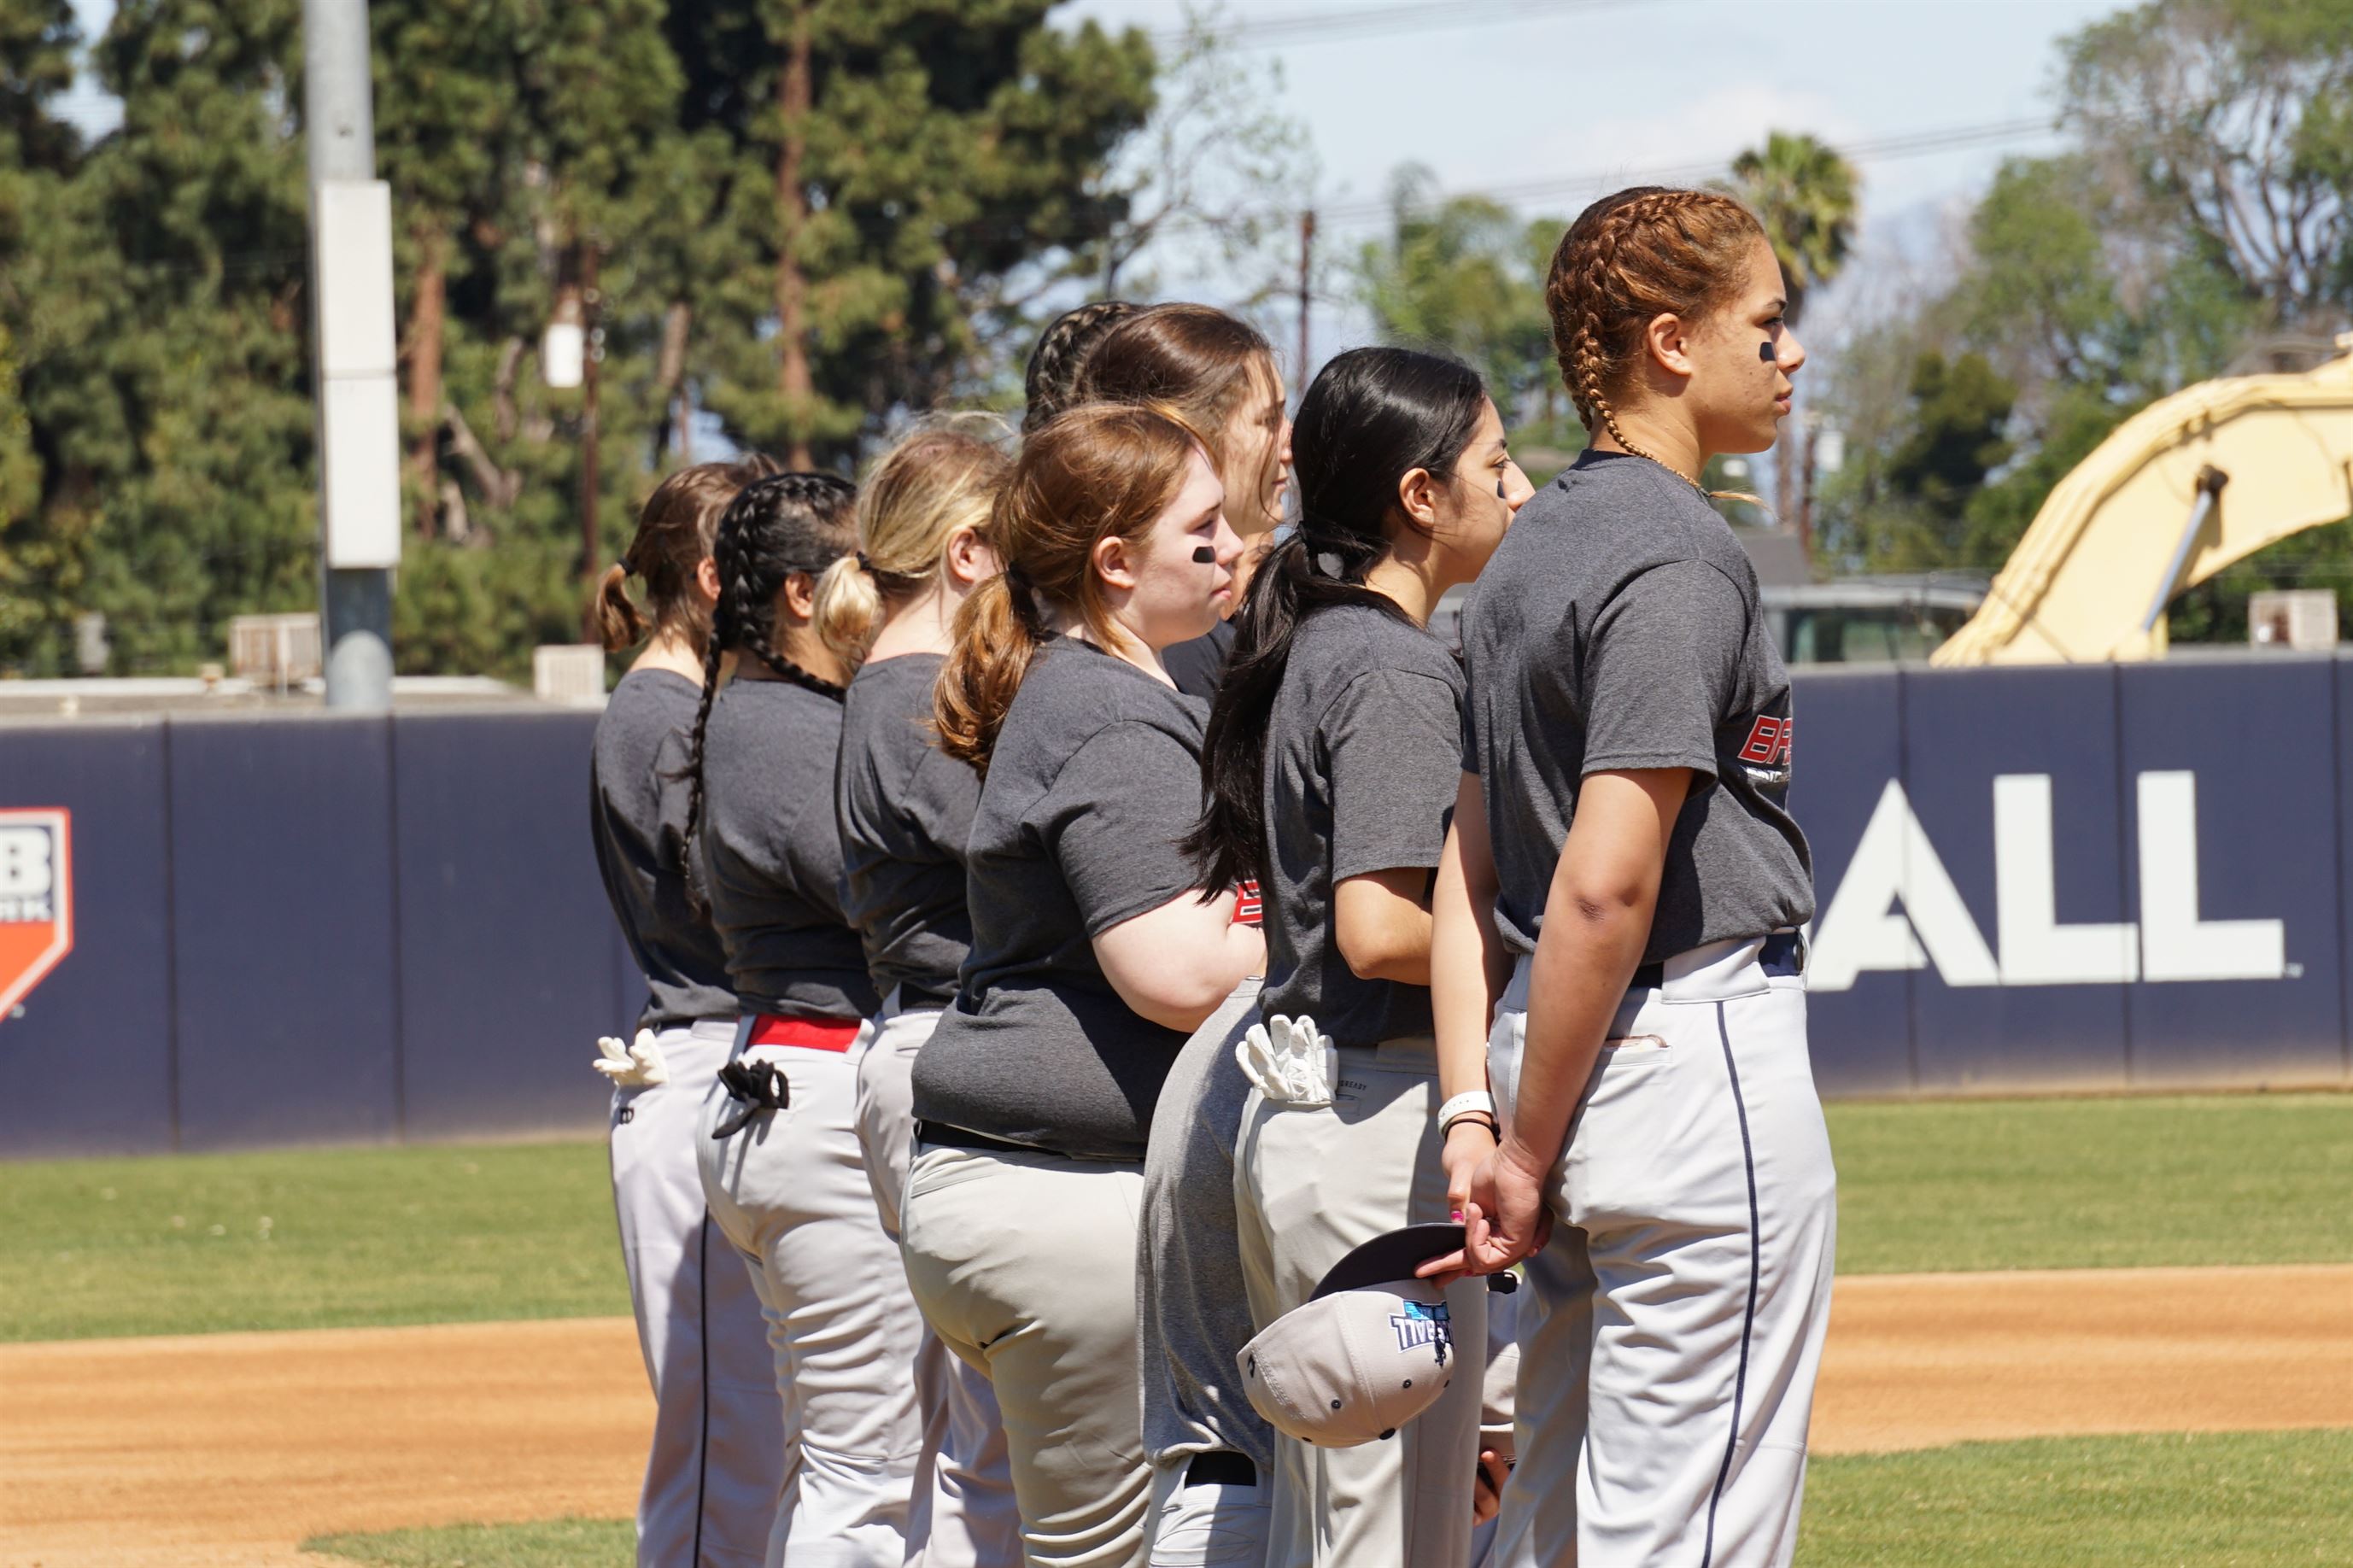 Sophomore Sabrina Robinson started the team to "give other girls an opportunity to play" baseball. Photo courtesy of Alejandra Vasquez-Lamadrid